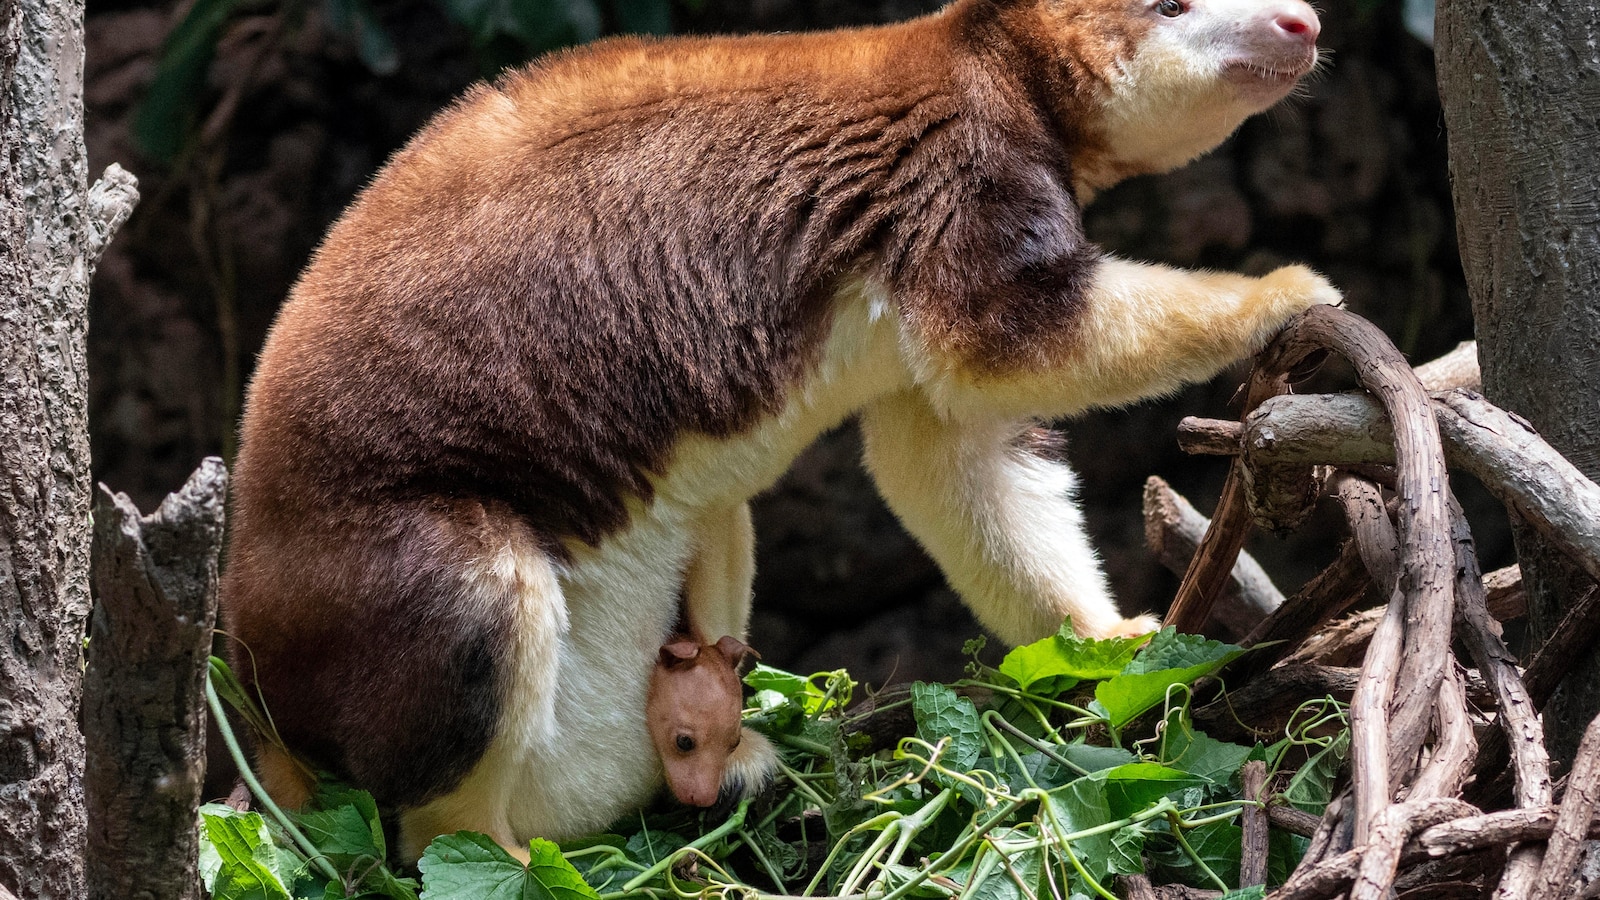 A 7-month-old tree kangaroo peeked out of its mom's pouch at the Bronx Zoo